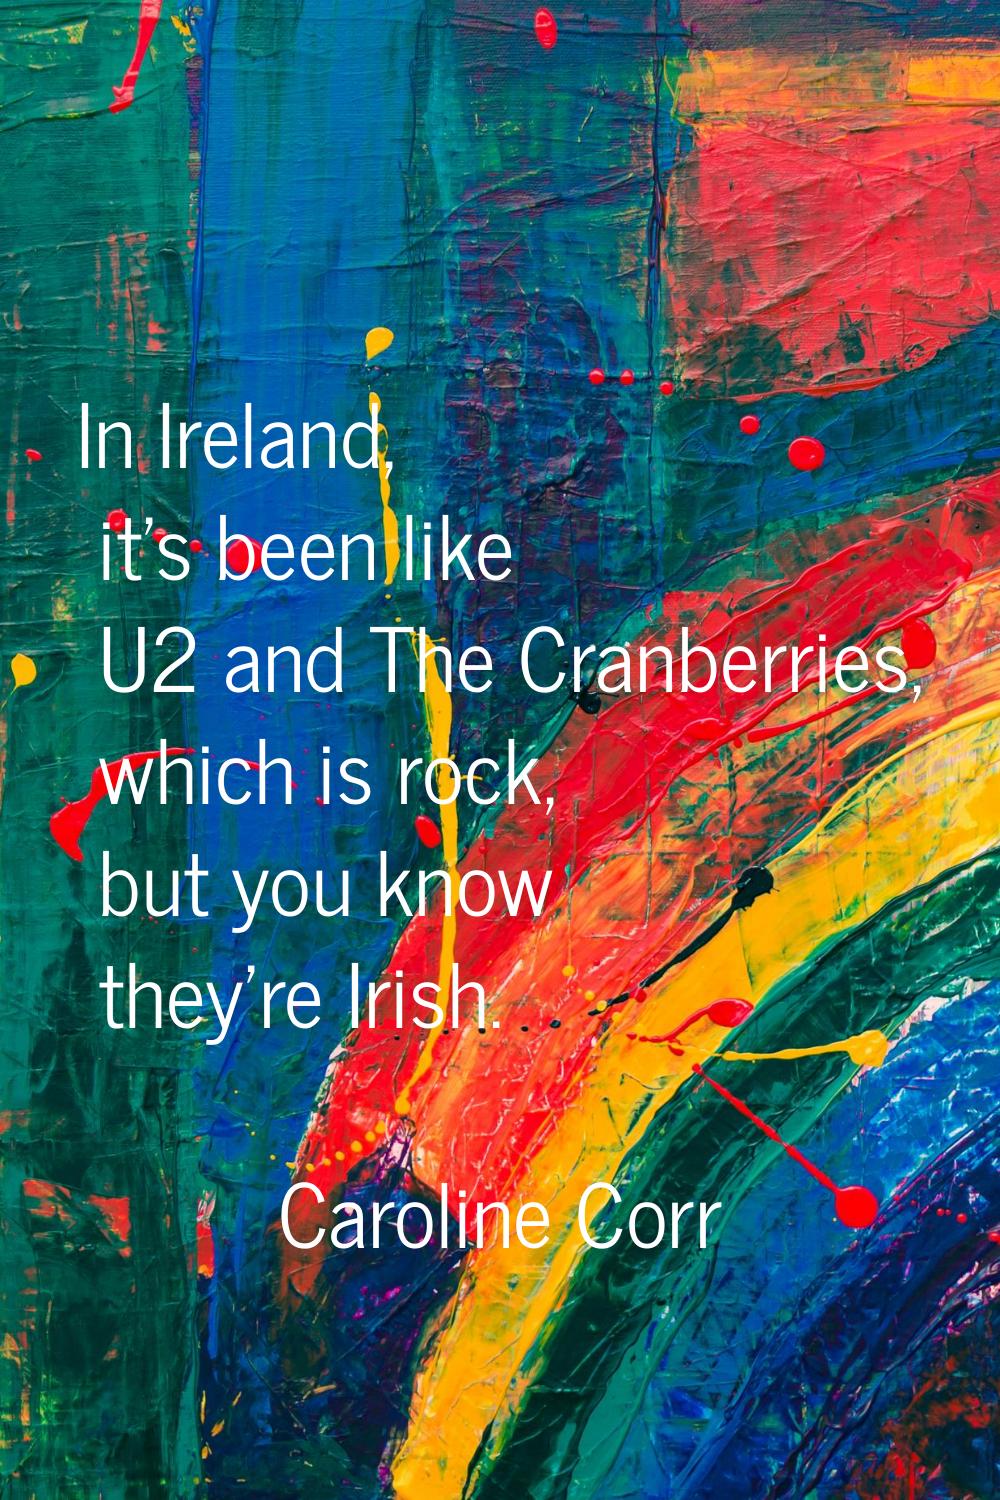 In Ireland, it's been like U2 and The Cranberries, which is rock, but you know they're Irish.